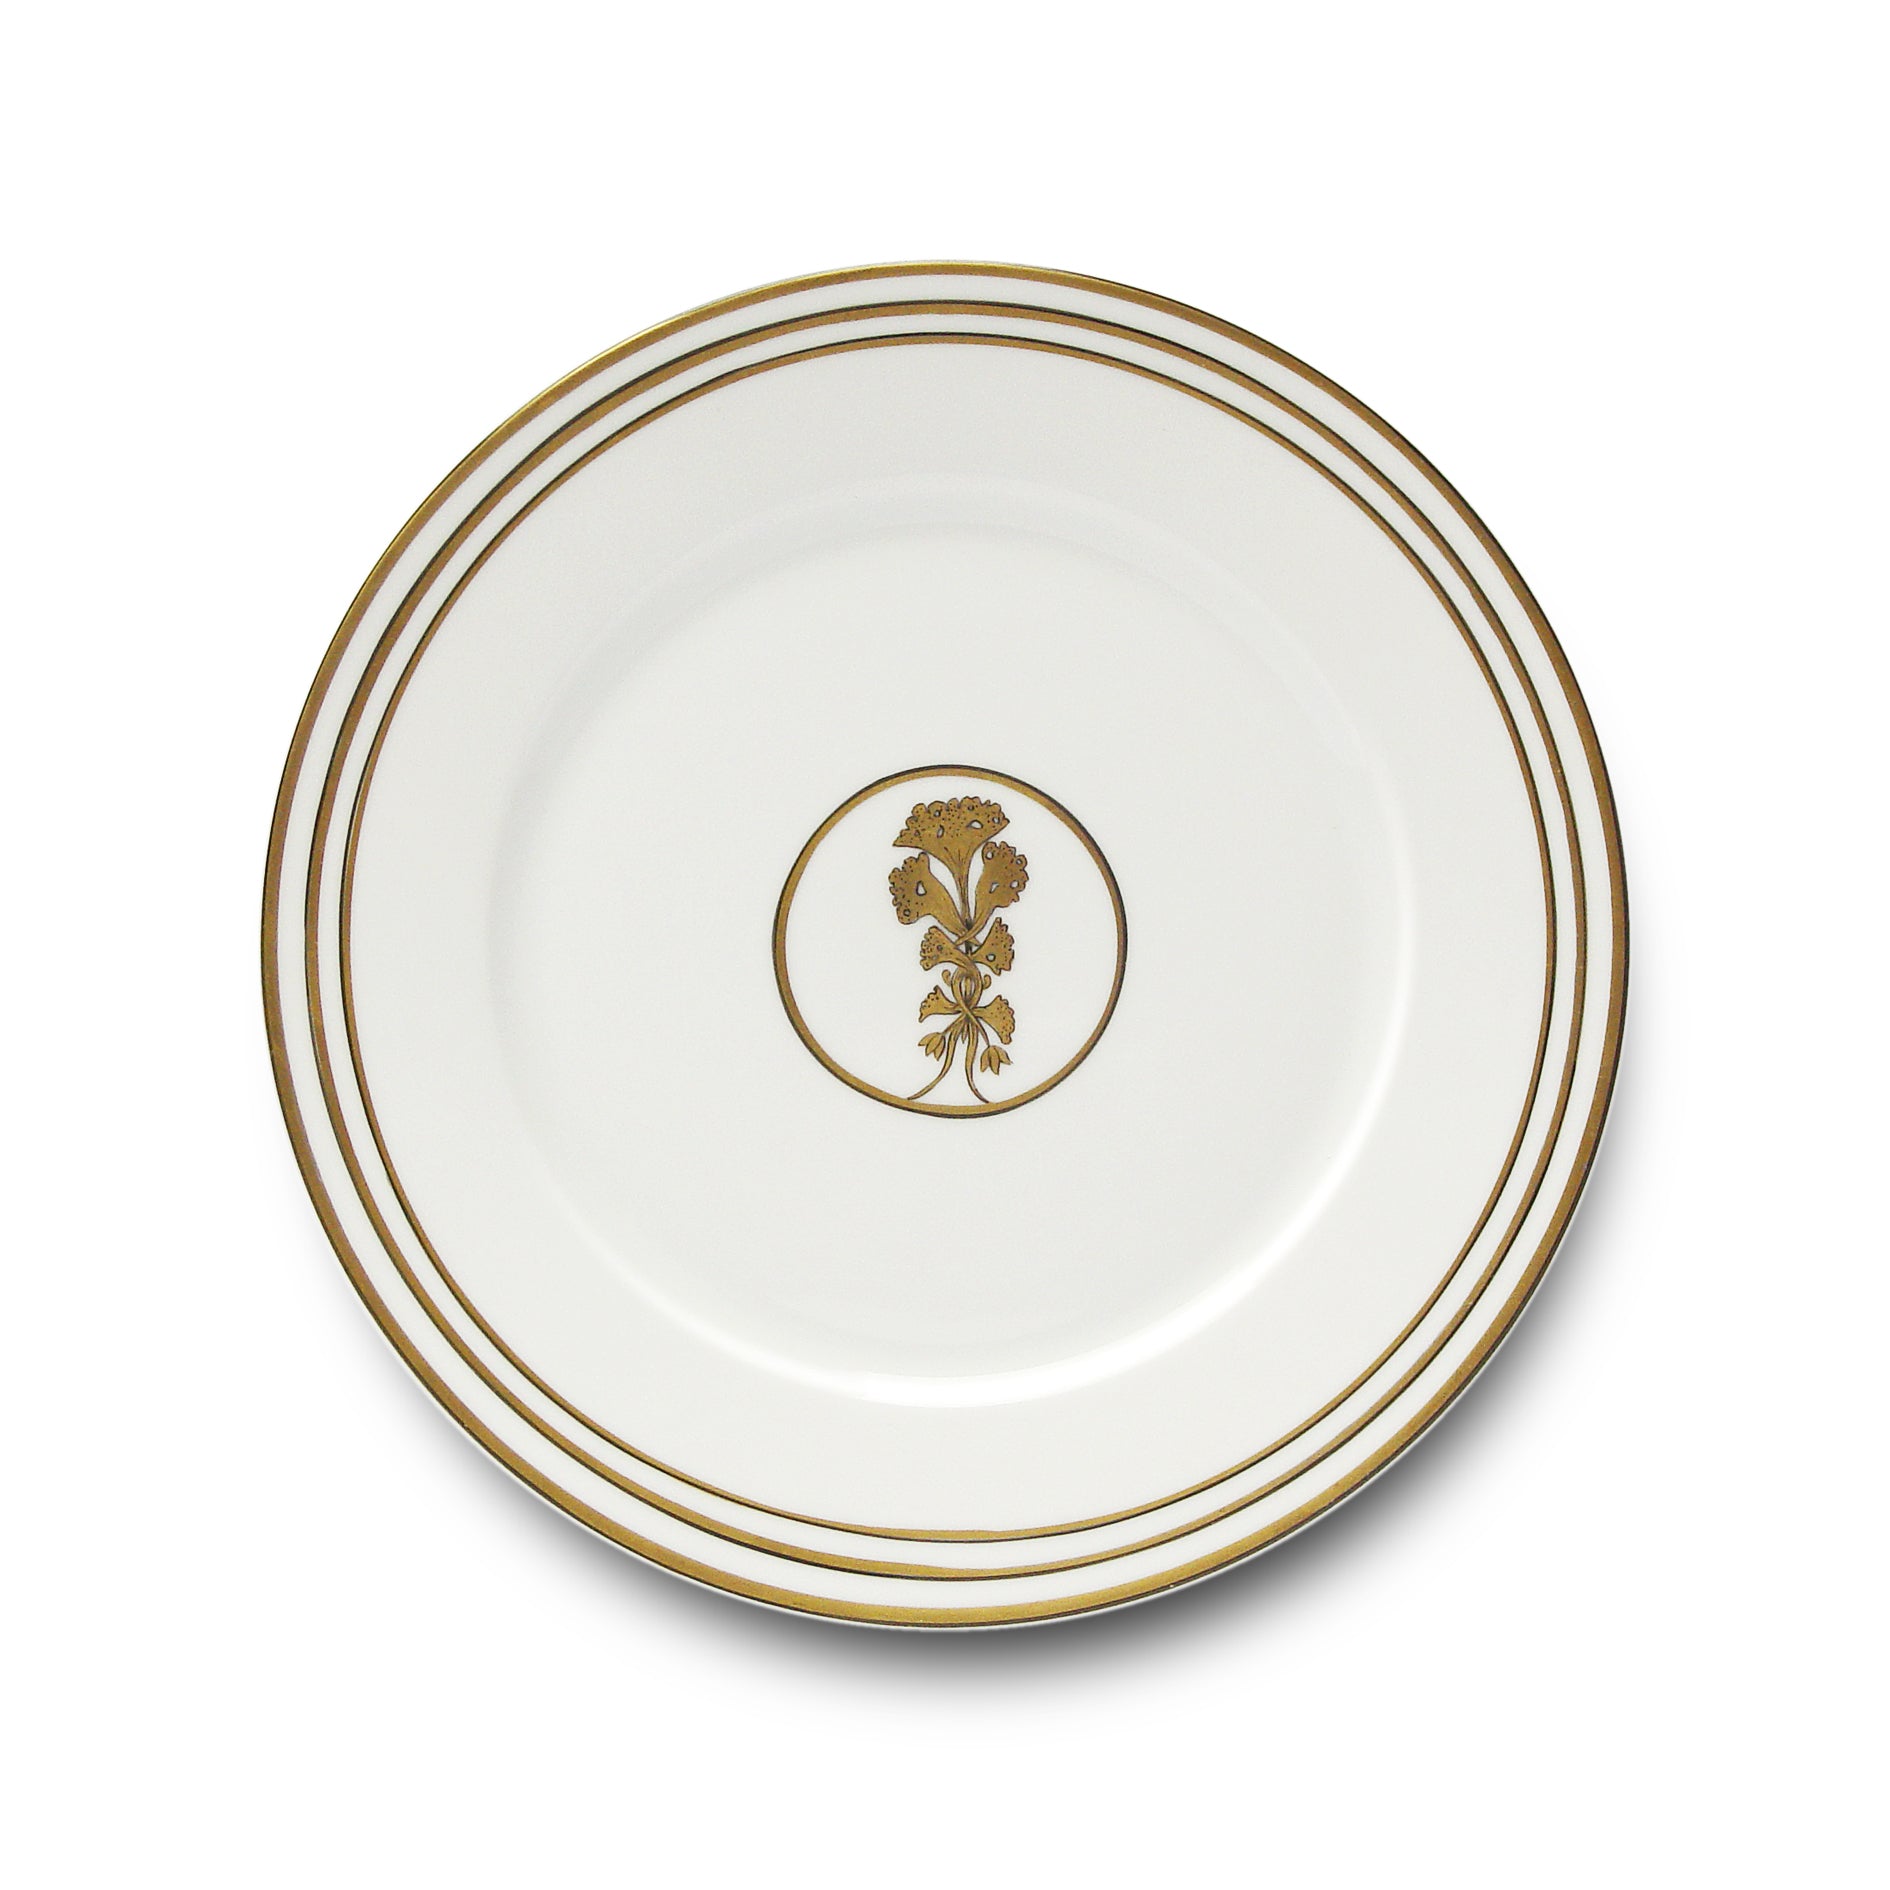 Or des Airs - Or des Mers - Dinner plate 02